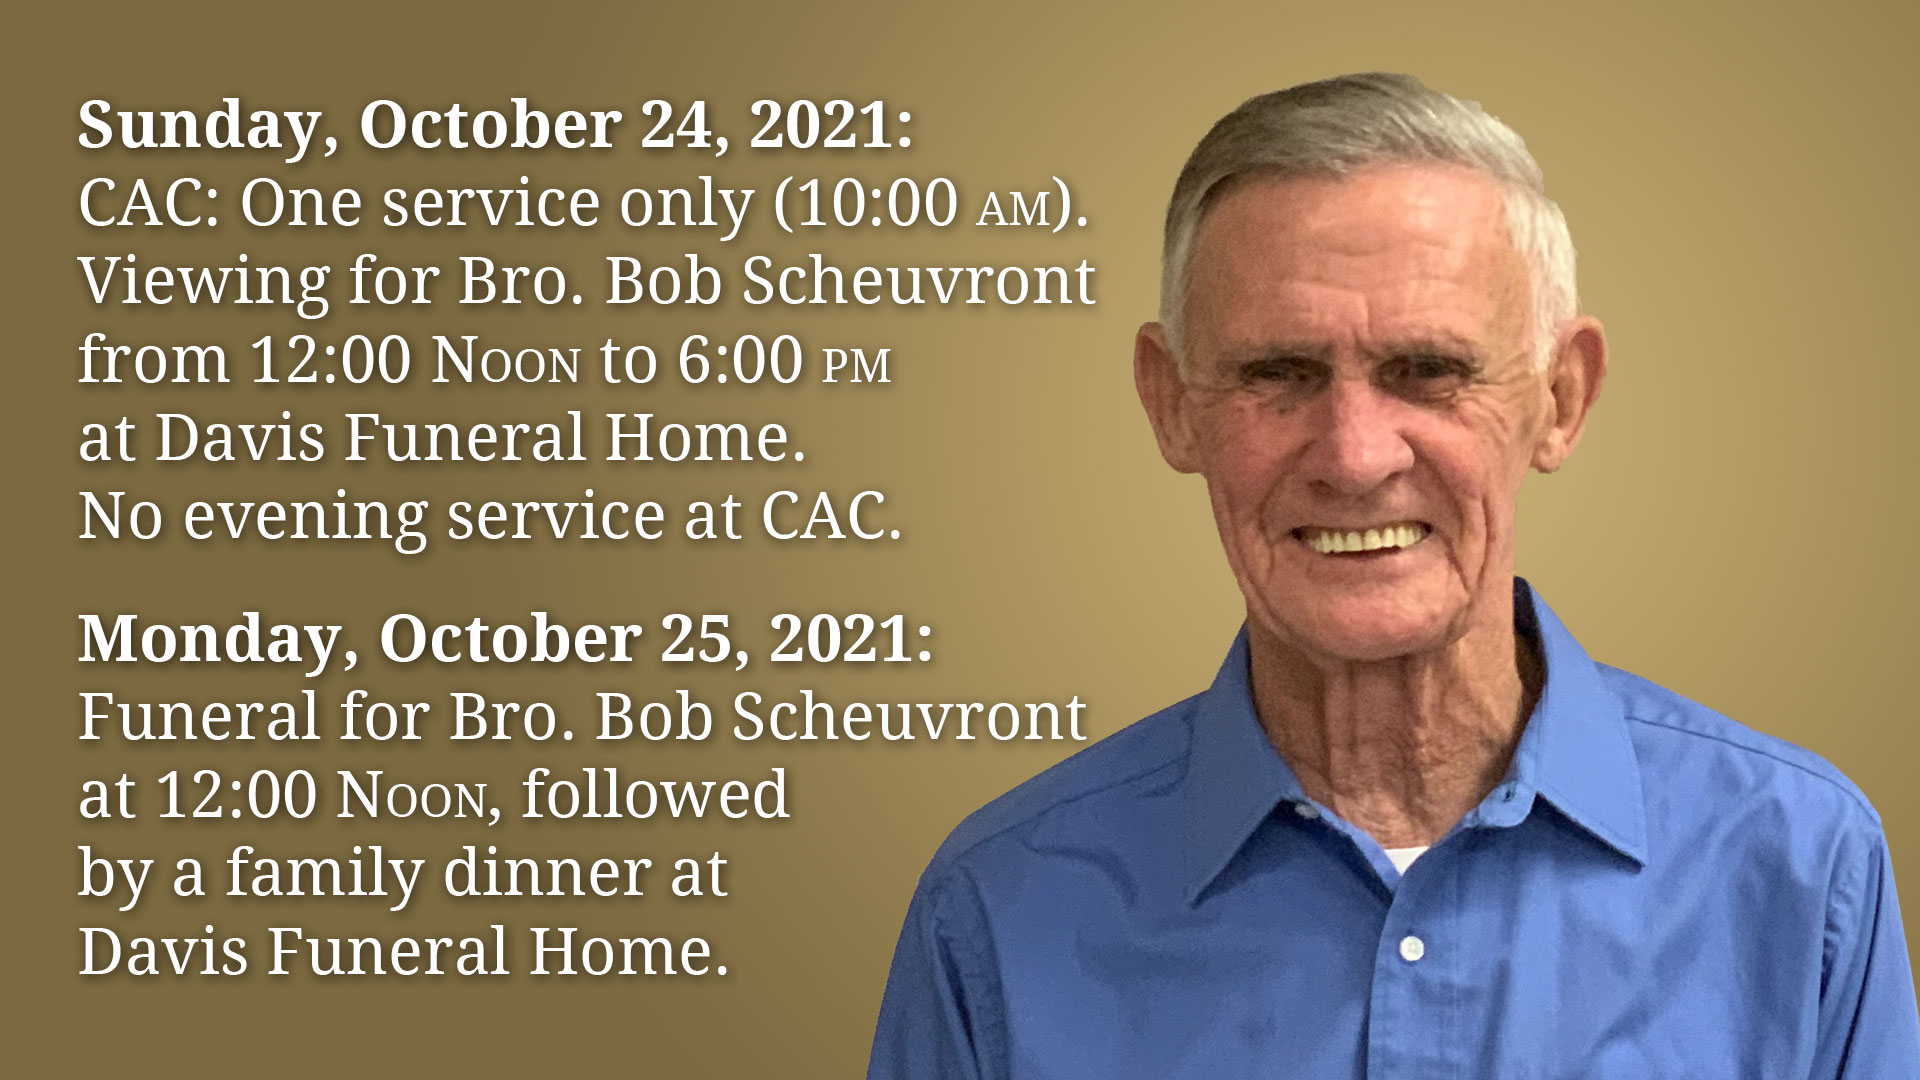 One service only (AM) tomorrow, Sunday, Oct. 24, 2021